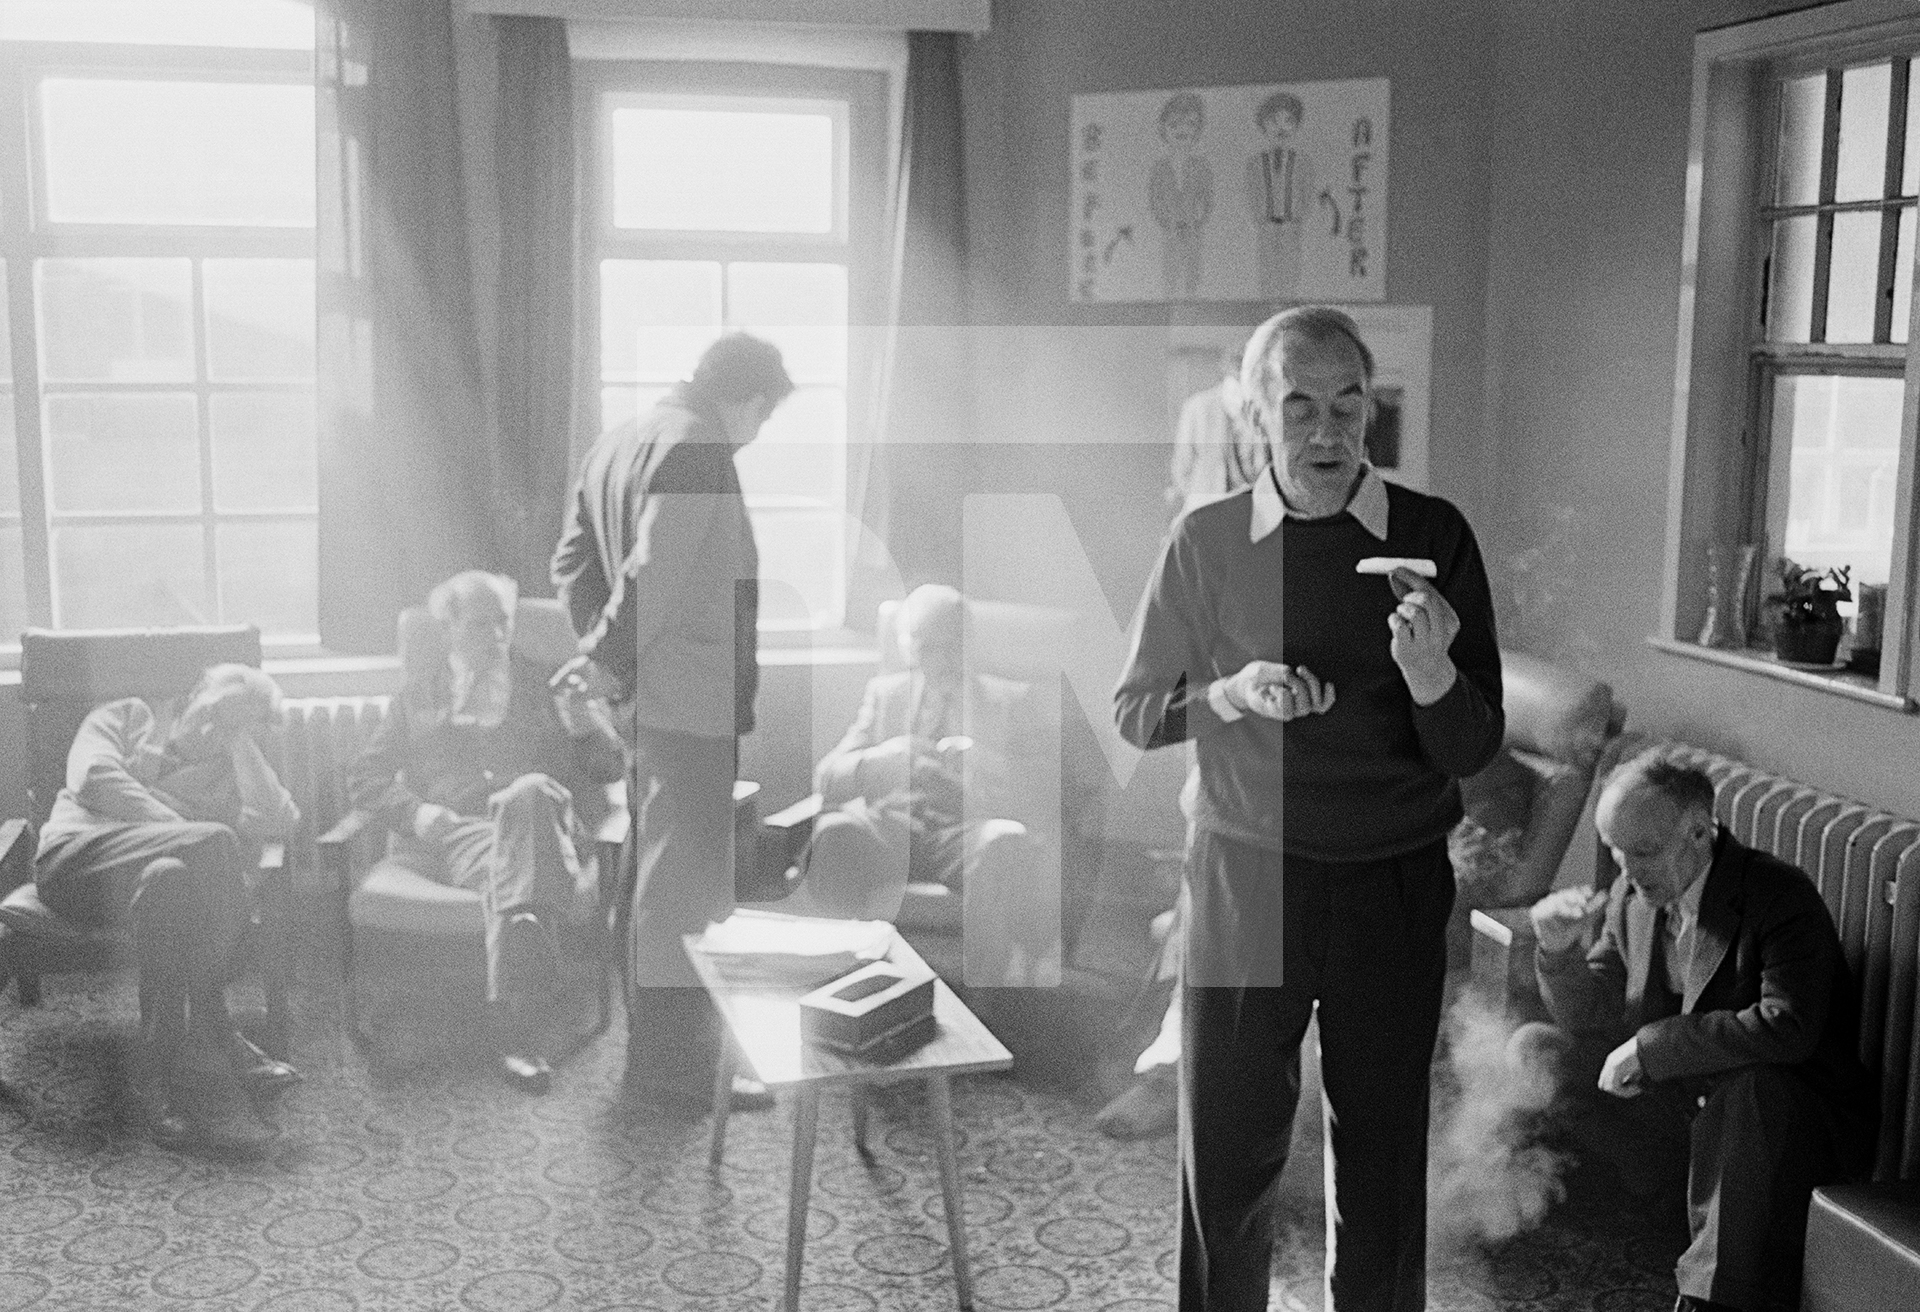 In the day-room, Stanley Massey aged 57 (foreground) rolls a cigarette, Clayton Ward, Prestwich Psychiatric Hospital, Manchester. February 1978 by Daniel Meadows